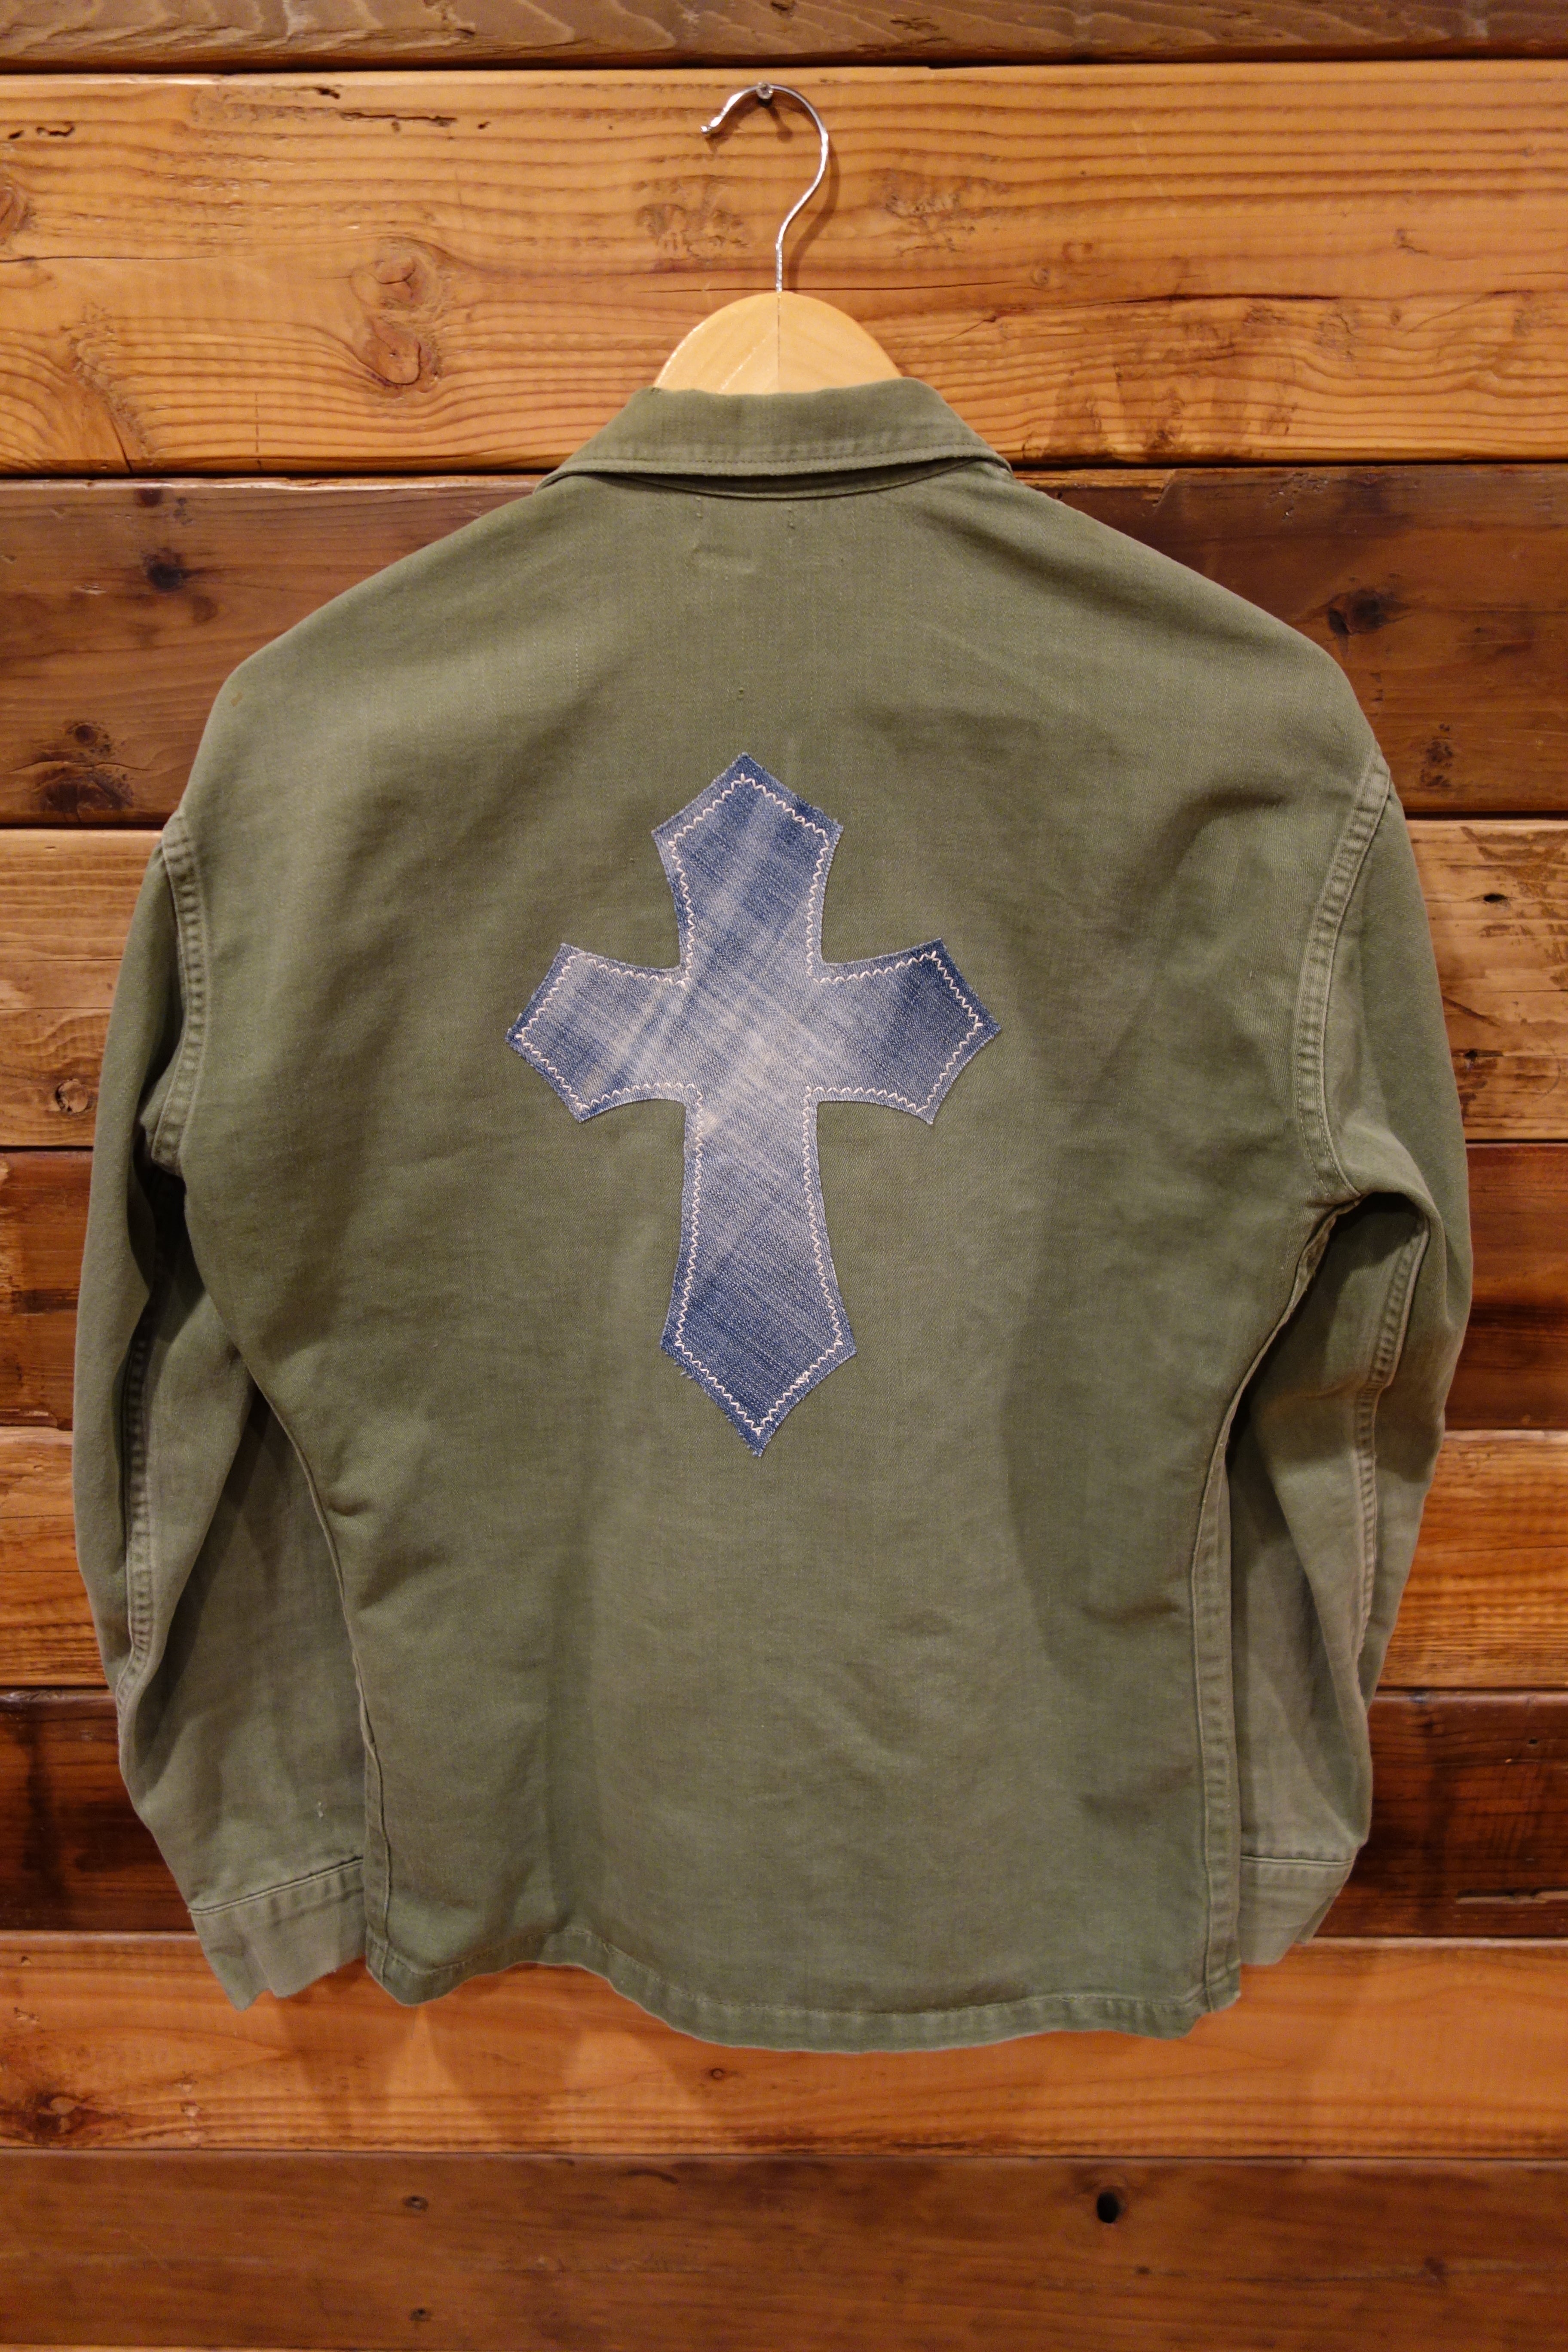 Vintage one of a kind military issue jacket, cross